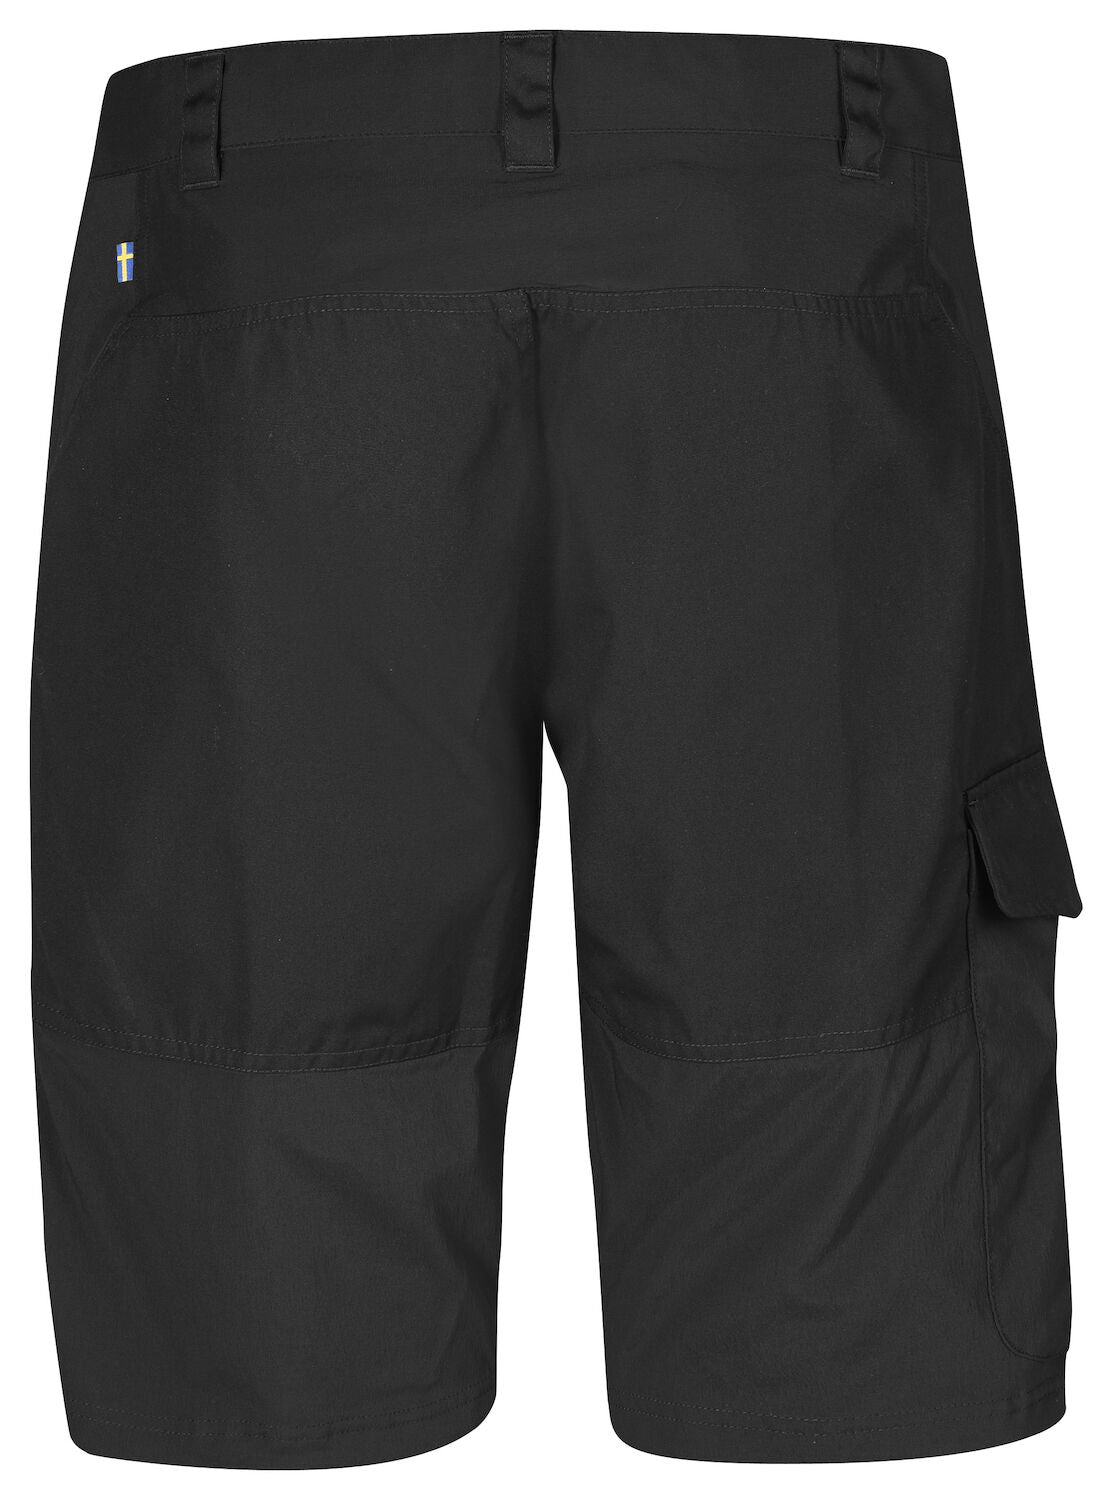 black branded premium men's shorts/trousers with leather fox logo and stylish pockets.